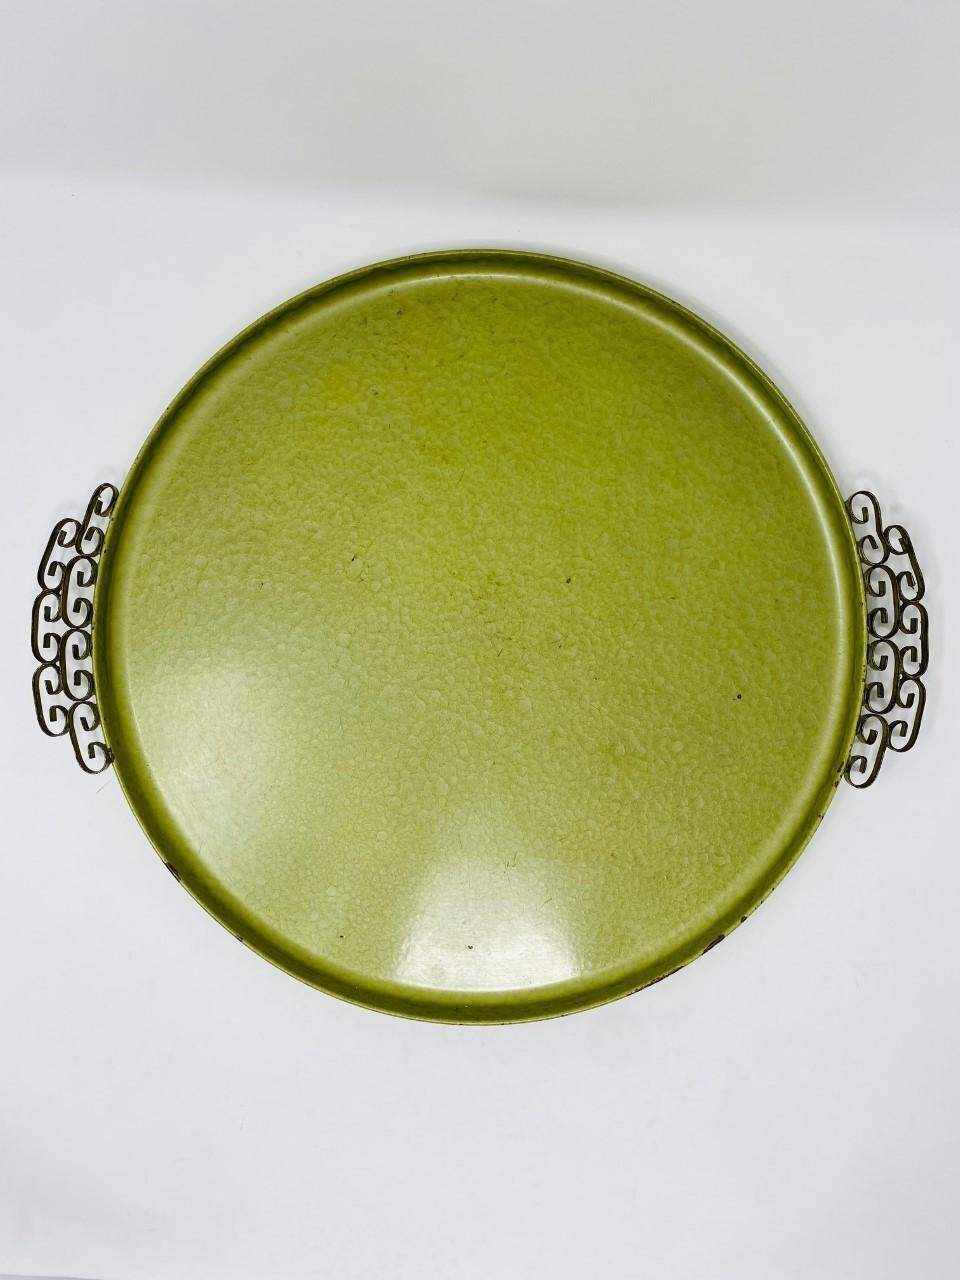 Vintage Mid Century Kyes Moire’ Glaze Brass and Enamel Green Tray 1960s For Sale 1